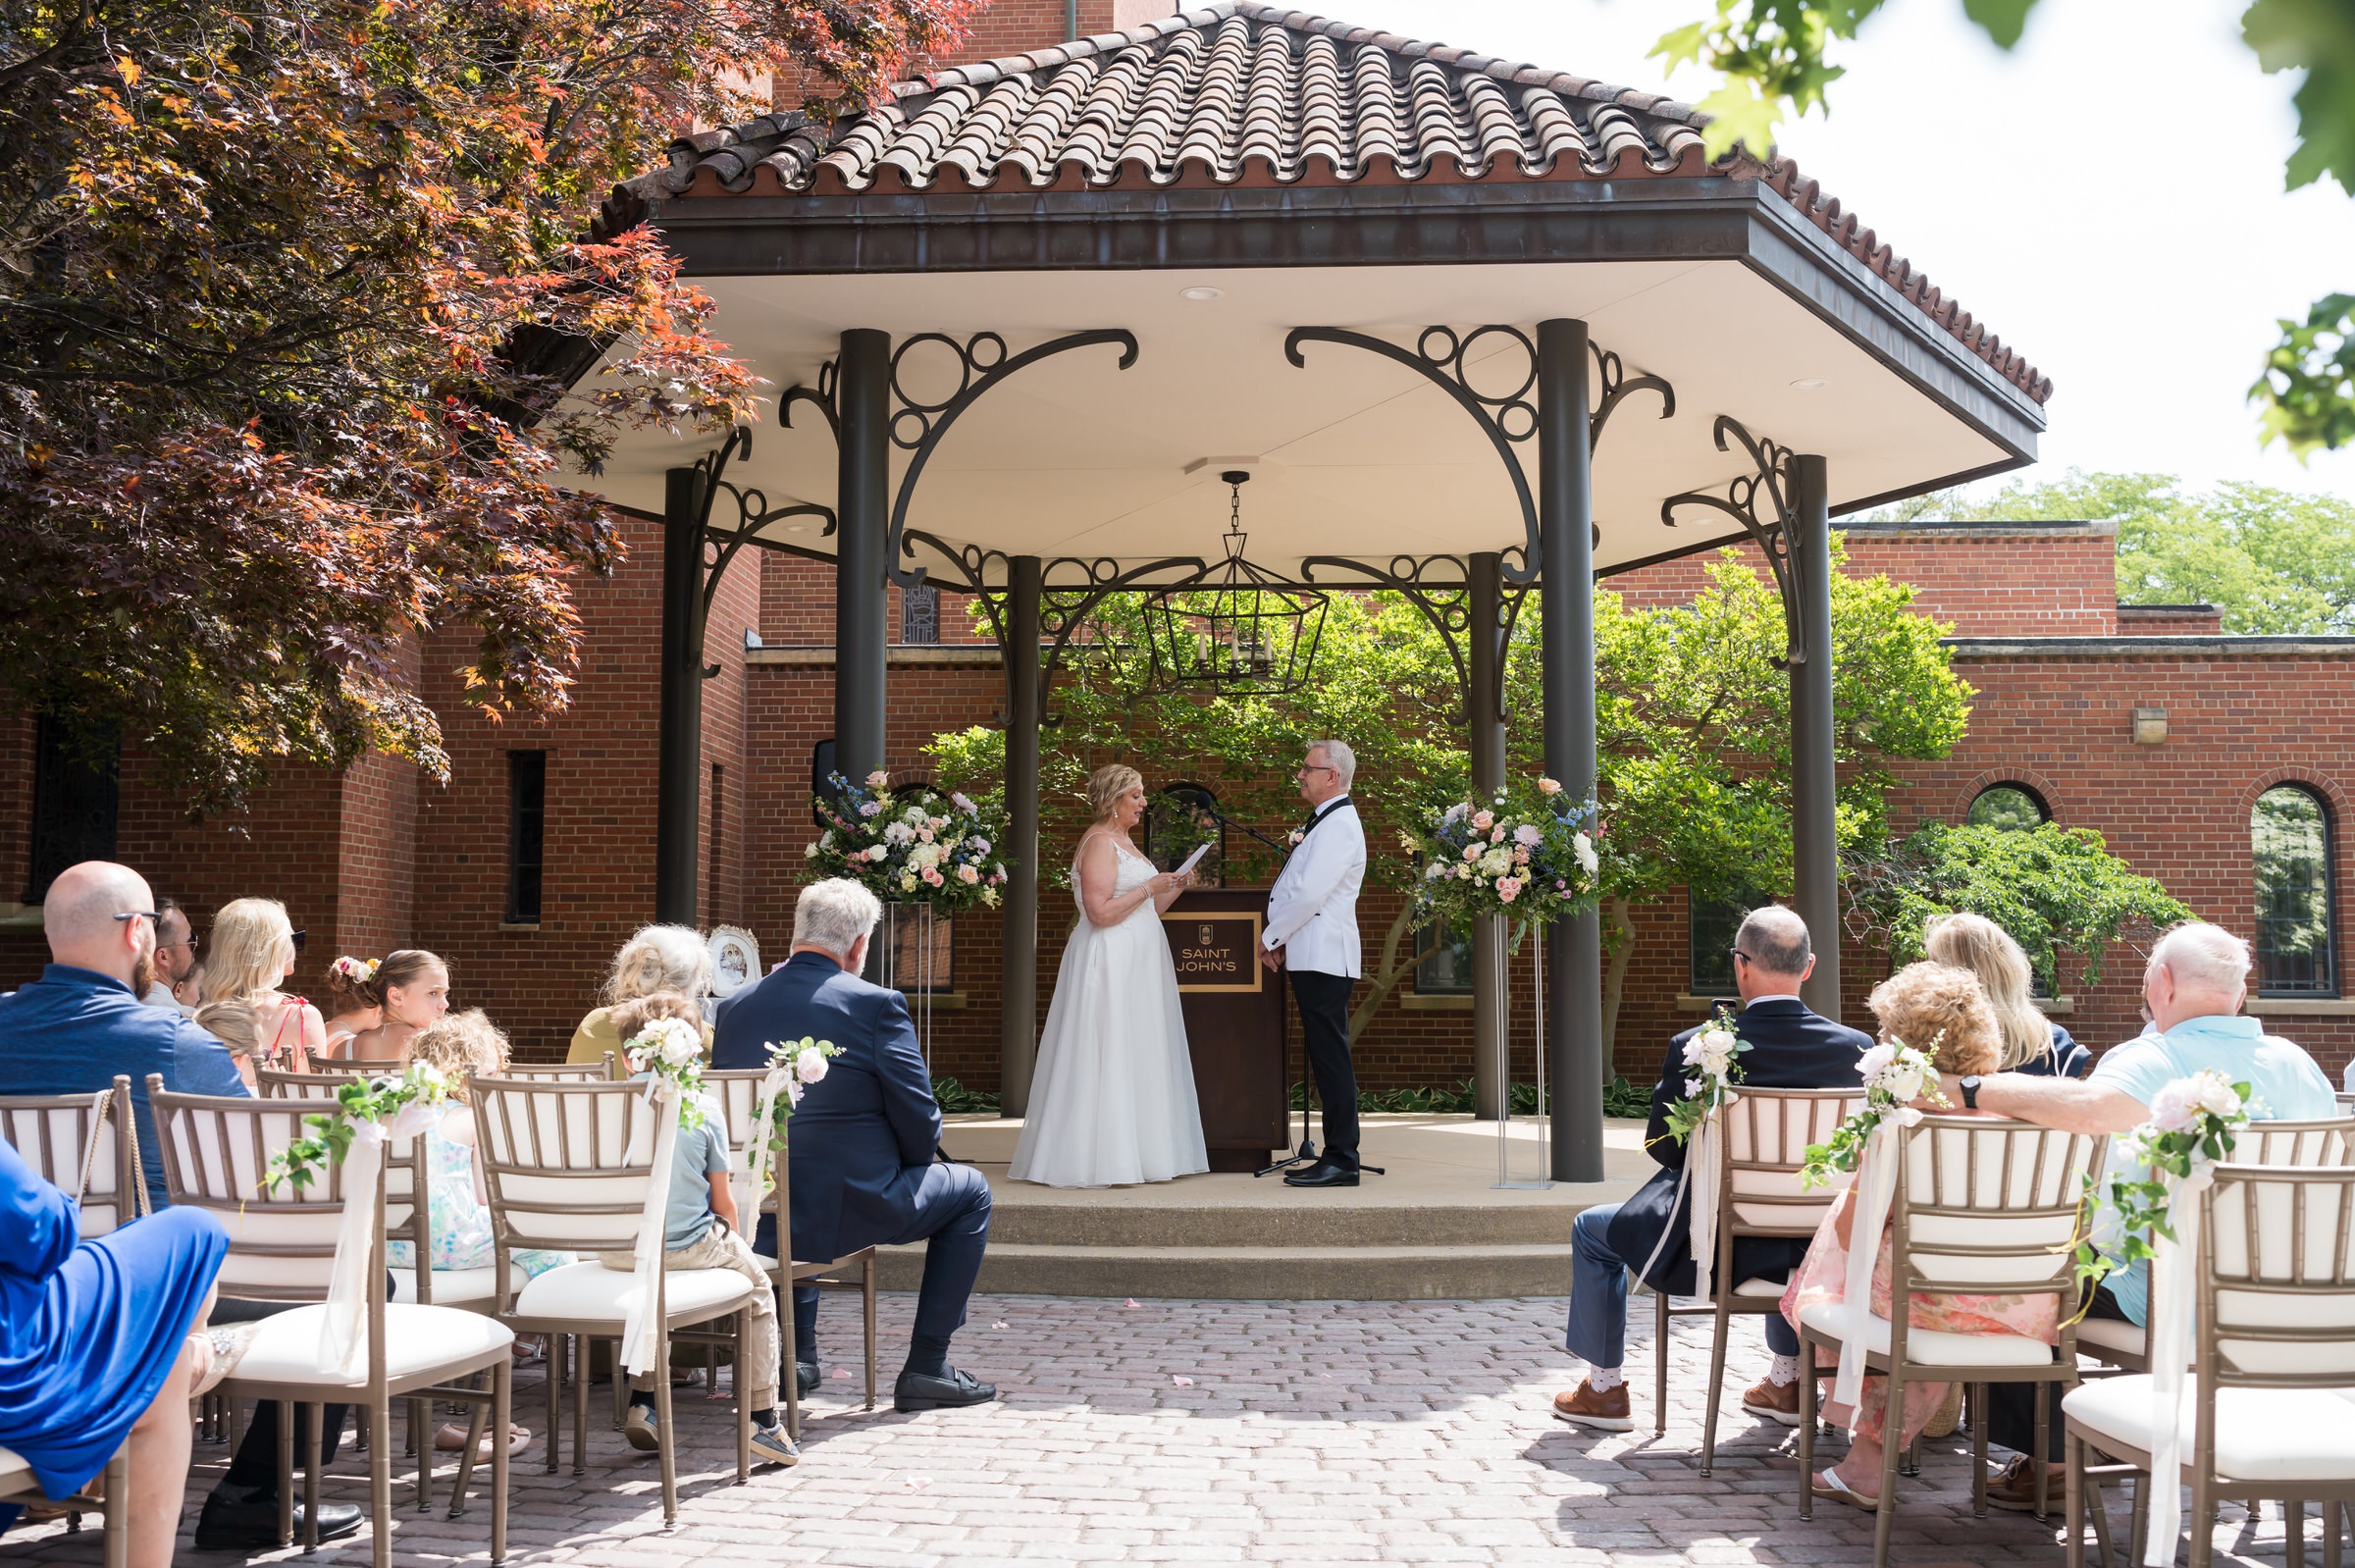 A couple gets married under the gazebo during a private wedding at St. John's Resort.